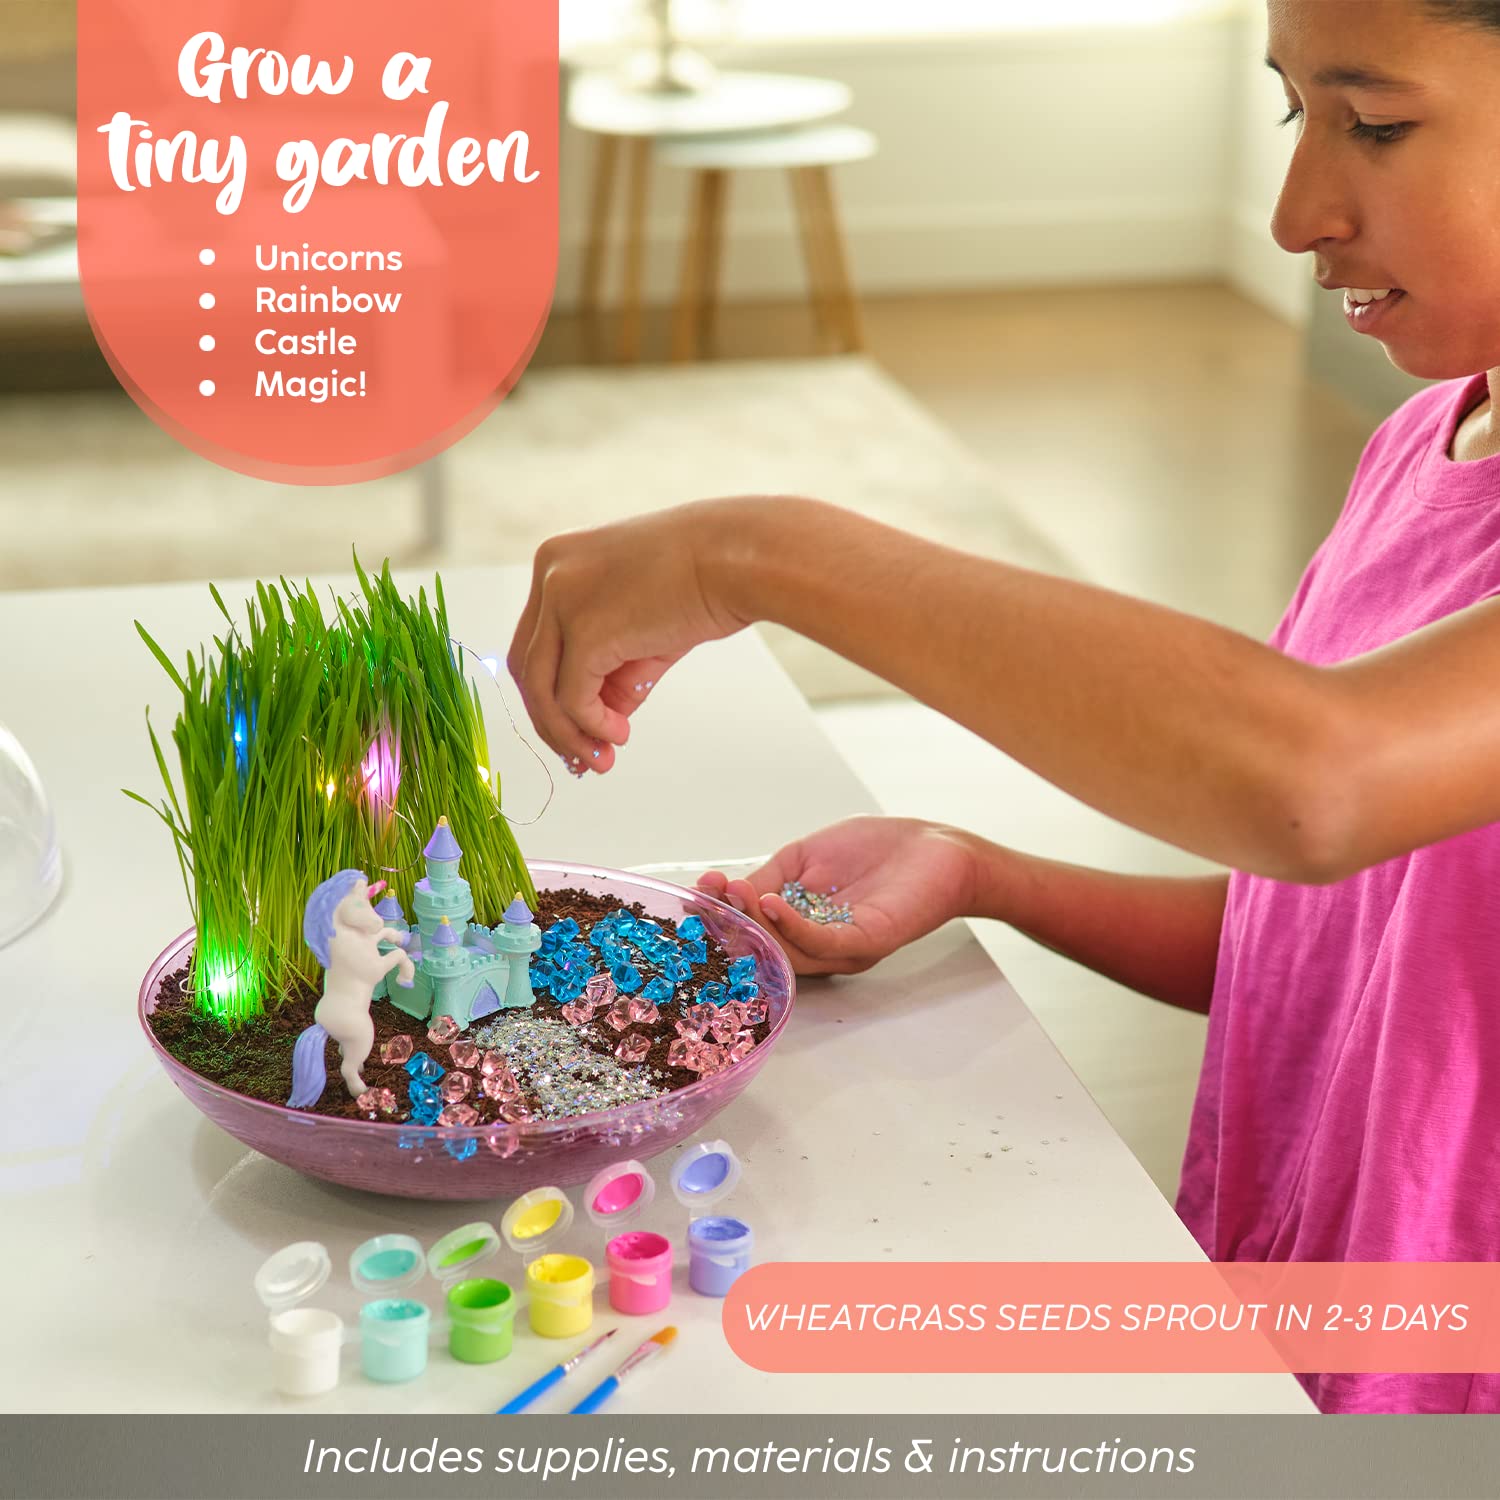 Bryte Light-Up Unicorn Terrarium Kit for Kids | All Inclusive - Castle, Fairy Garden Lights & More | Arts & Crafts, STEM Activities for Kids, Birthday Gifts, Boys & Girls Toys | Ages 4-10 Years Old